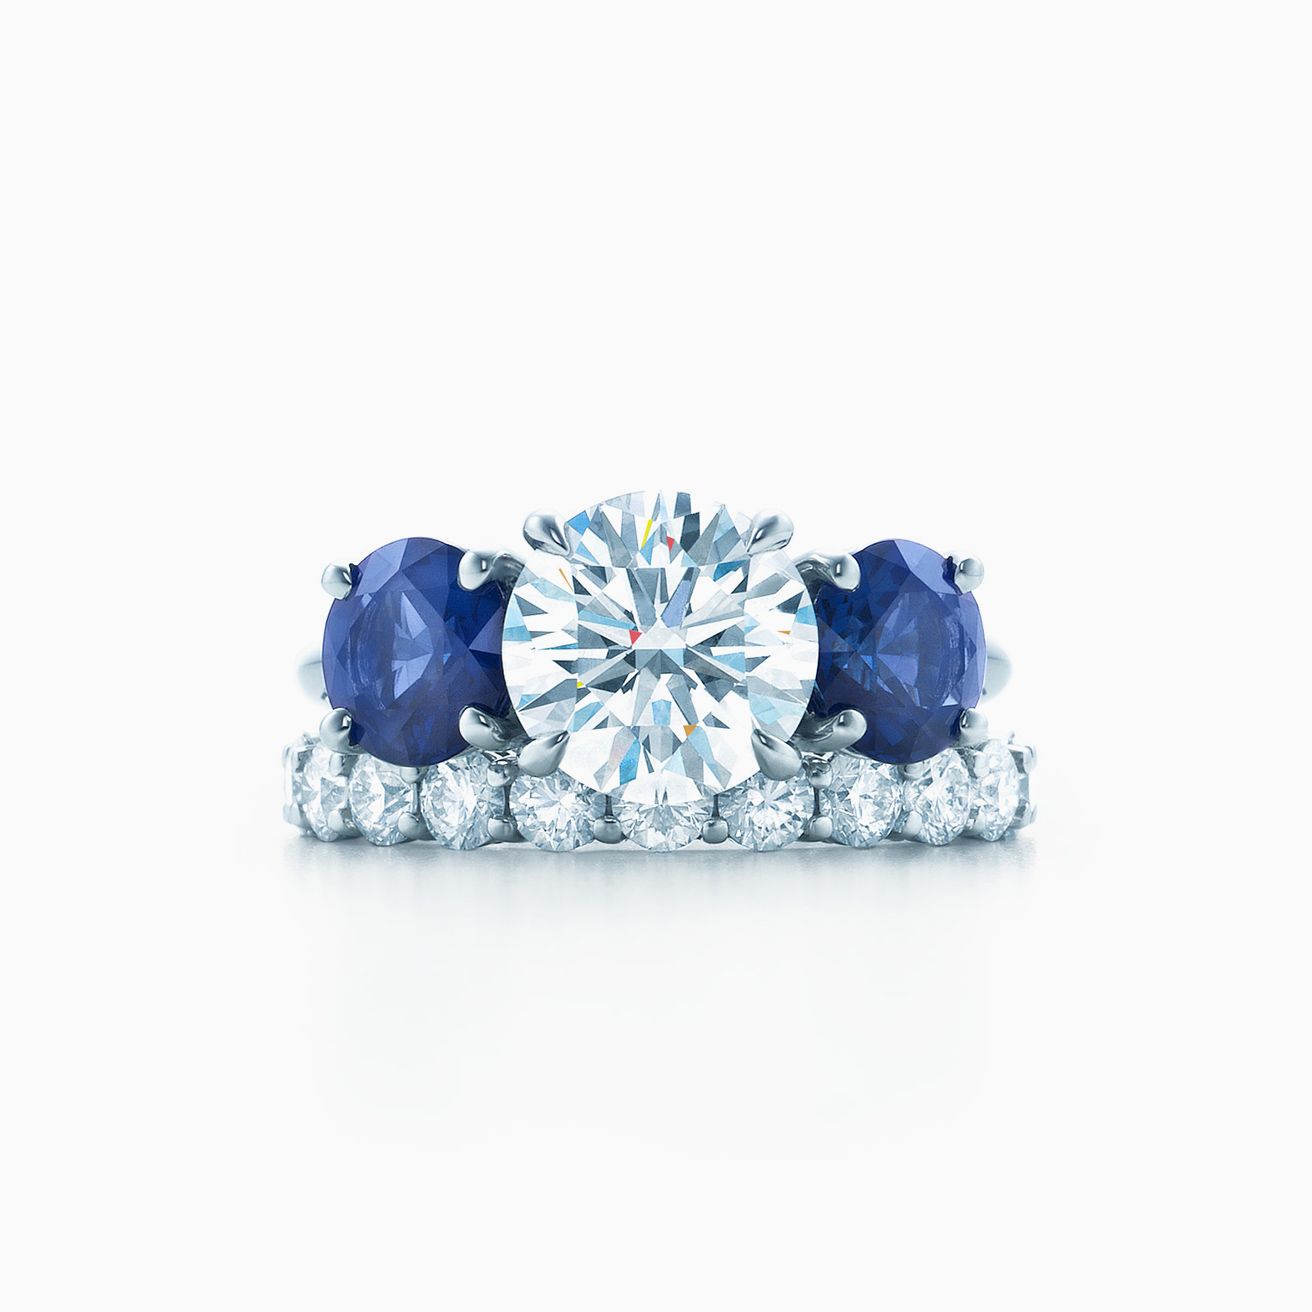 Tiffany Three Stone engagement ring with sapphire side stones in platinum. | Tiffany & Co.